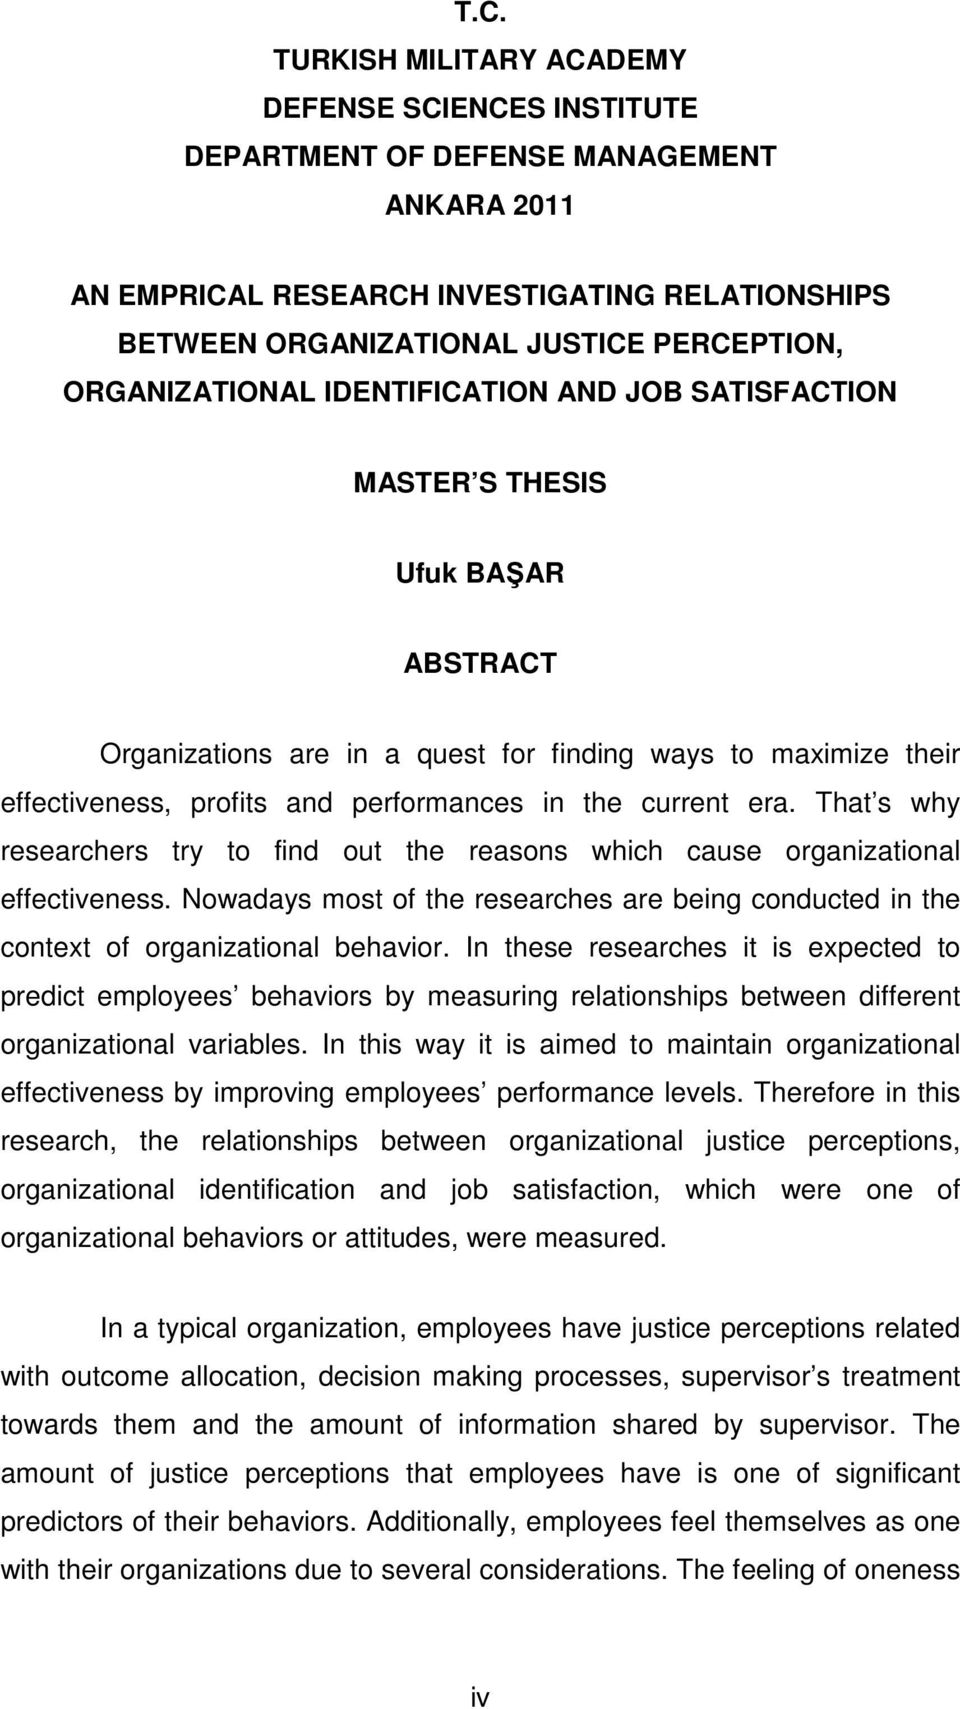 current era. That s why researchers try to find out the reasons which cause organizational effectiveness. Nowadays most of the researches are being conducted in the context of organizational behavior.